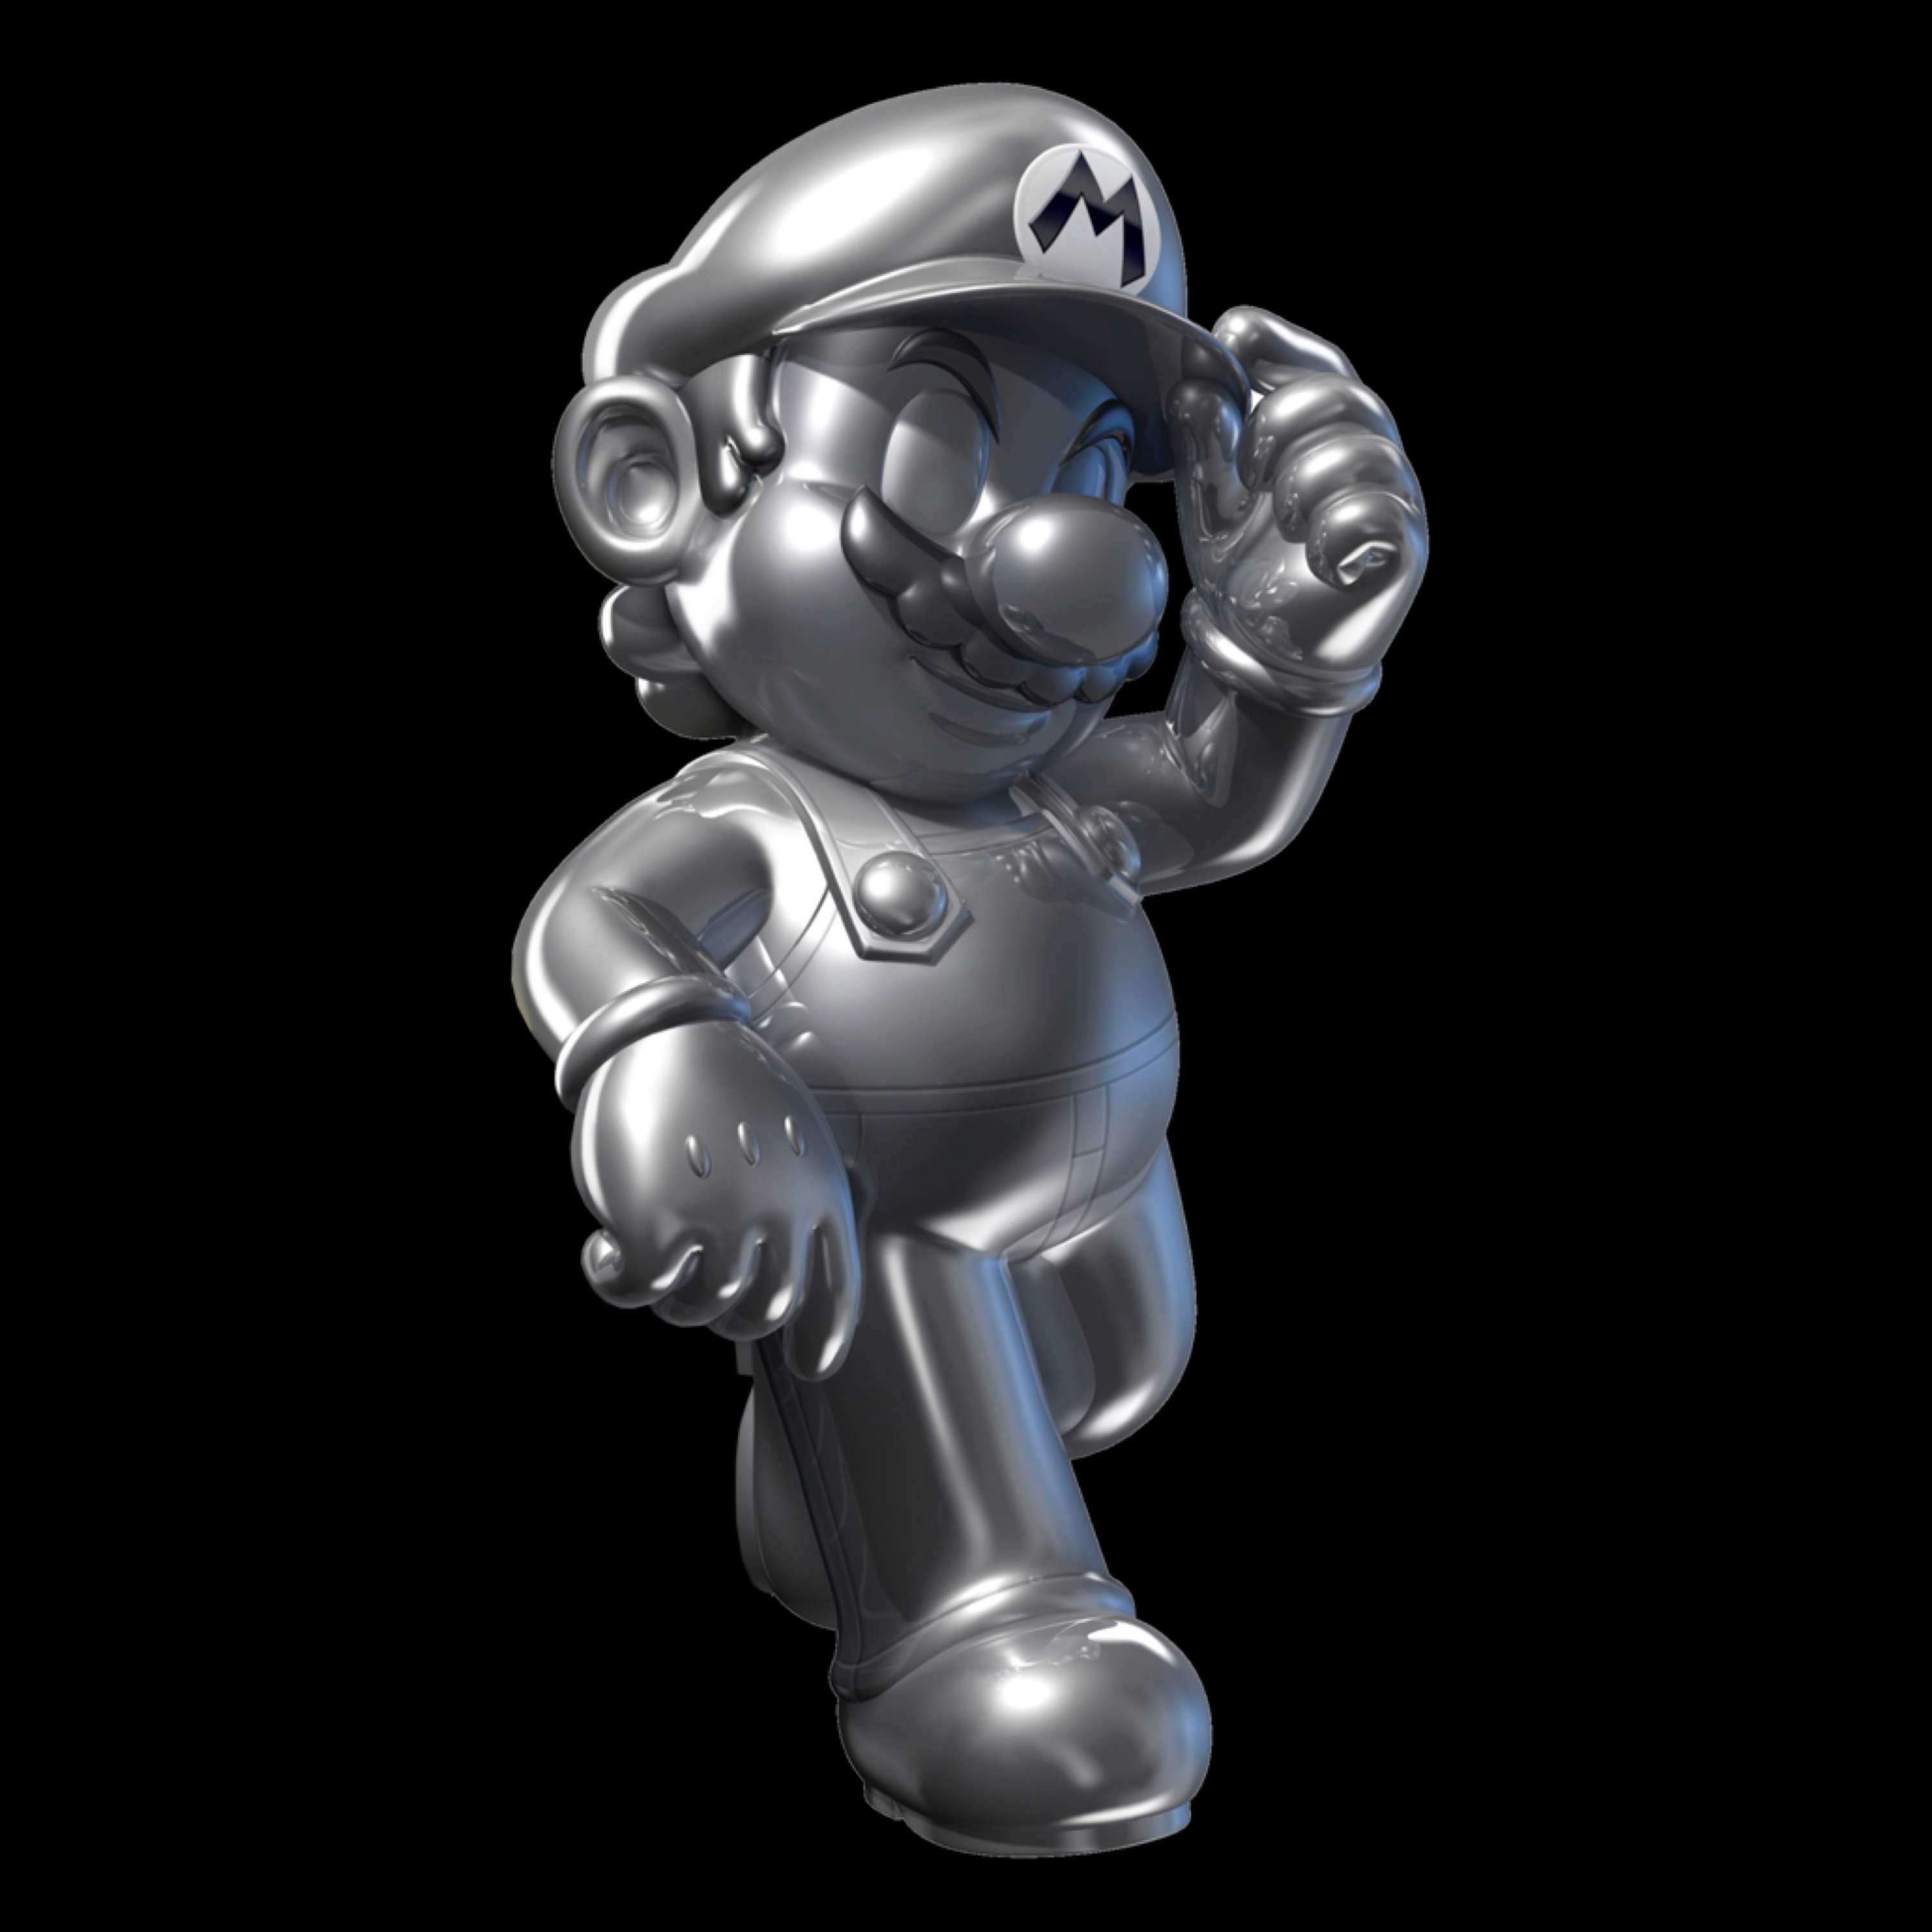 Ep. 138: Metal Mario PREVIEW (PATREON ONLY)